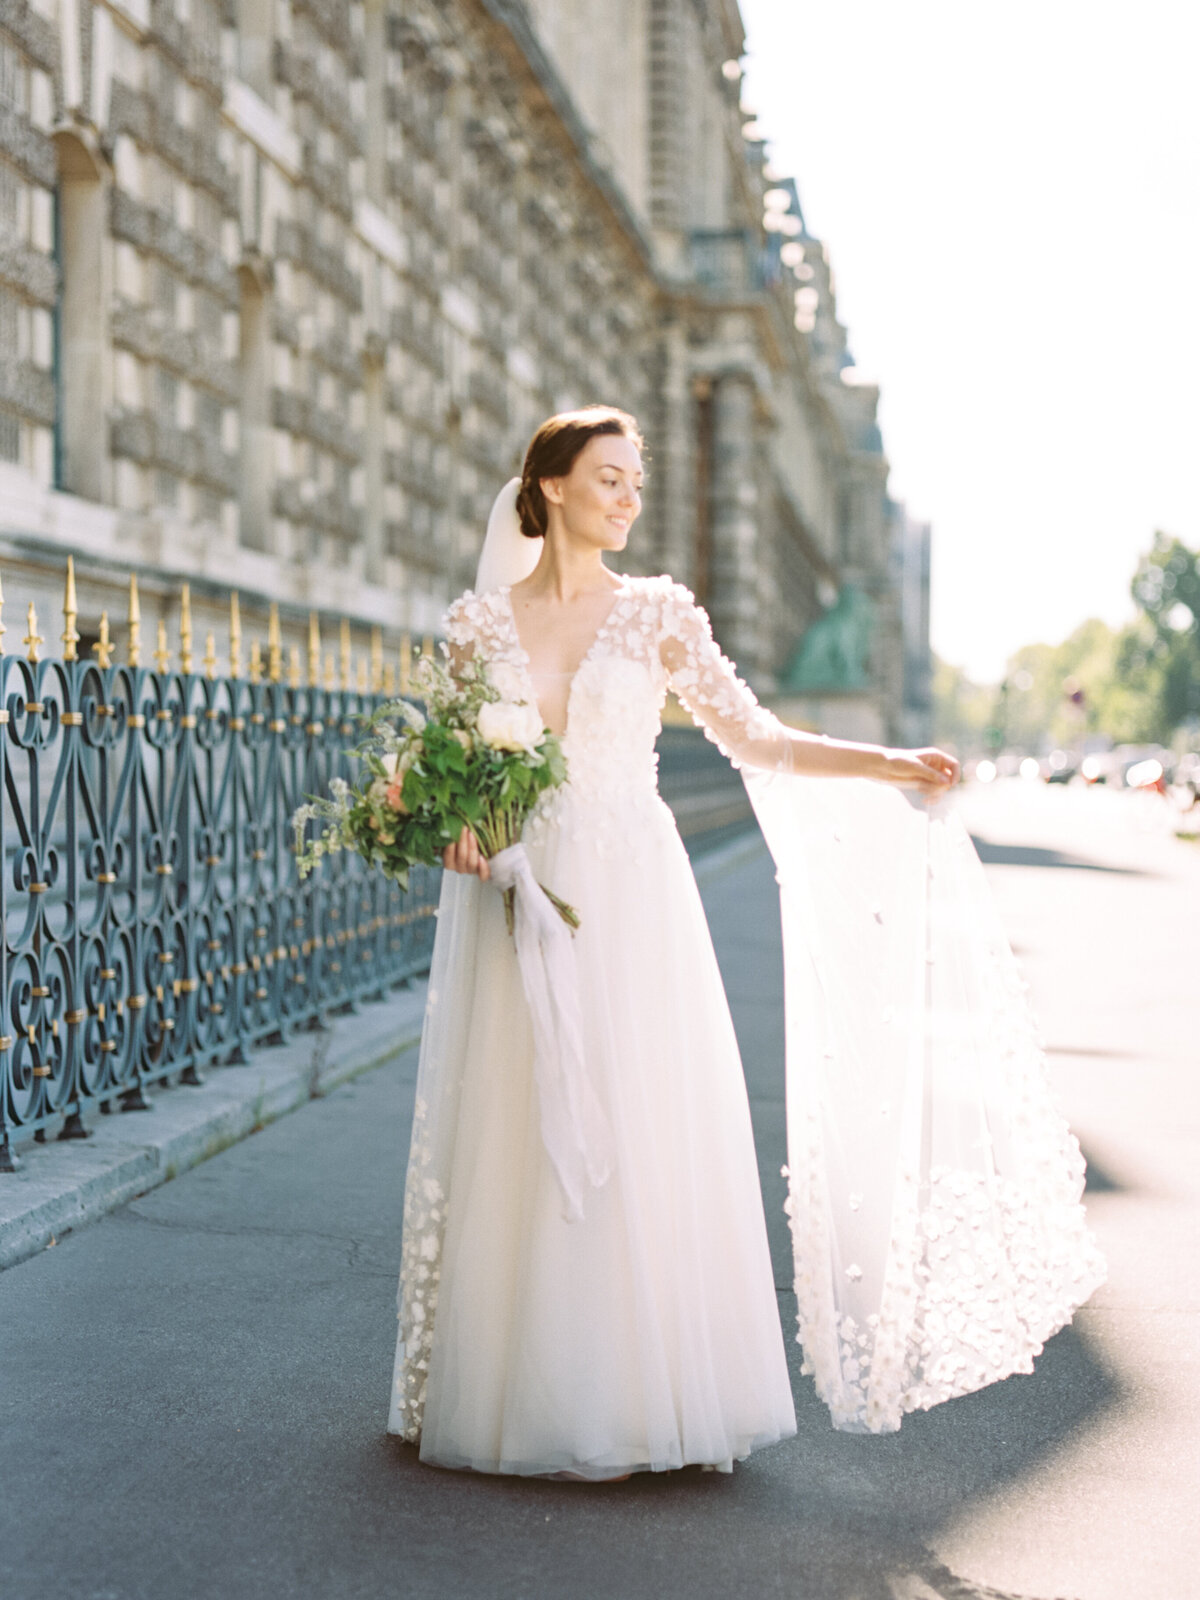 Destination Fine Art Wedding Editorial Photography in Paris with Max Chaoul-31